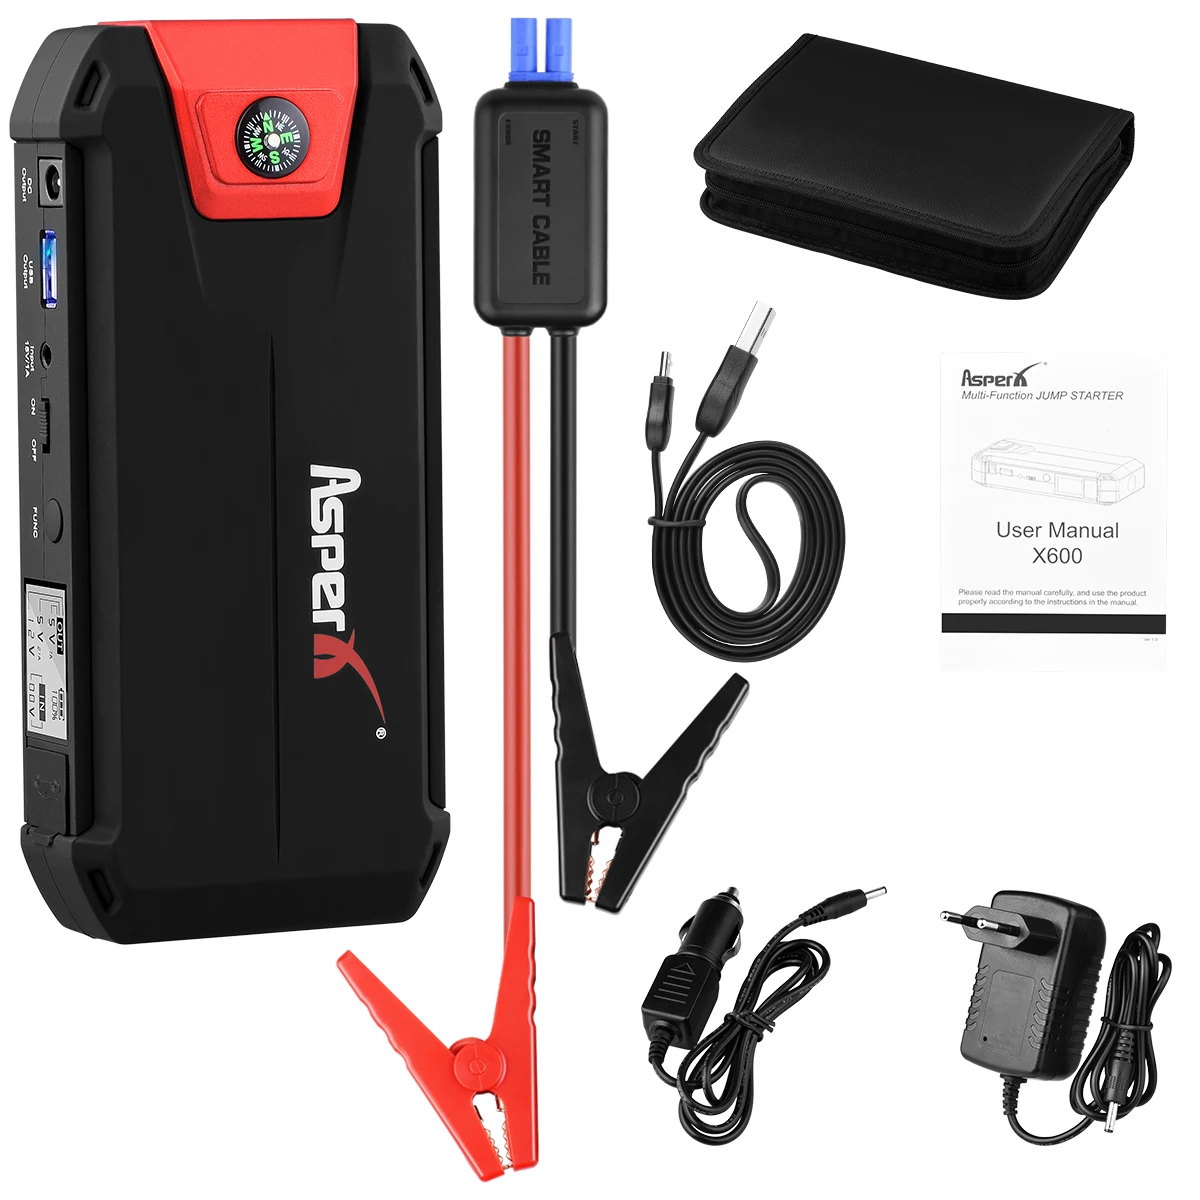 GREPRO Portable 13800mAH Car Jump Starter 1000A Peak 12V Auto Battery Booster Portable Power Pack with LCD Display Jumper Cable noco gb40 Jump Starters